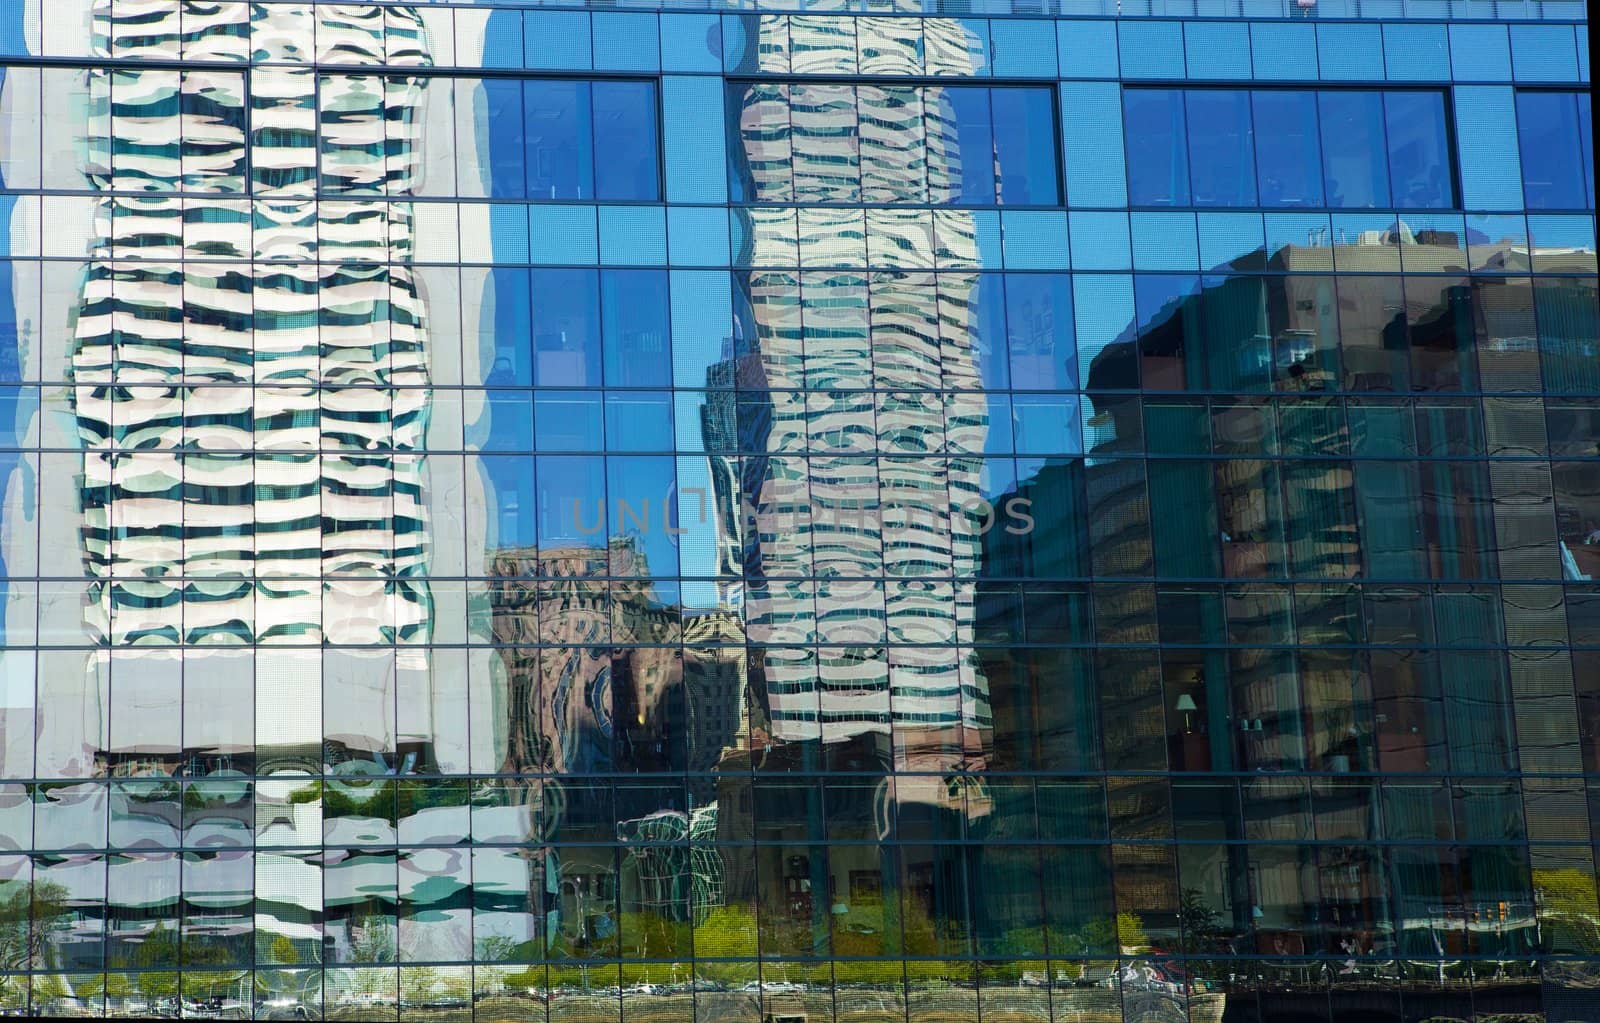 Distorted City Reflections by bobkeenan